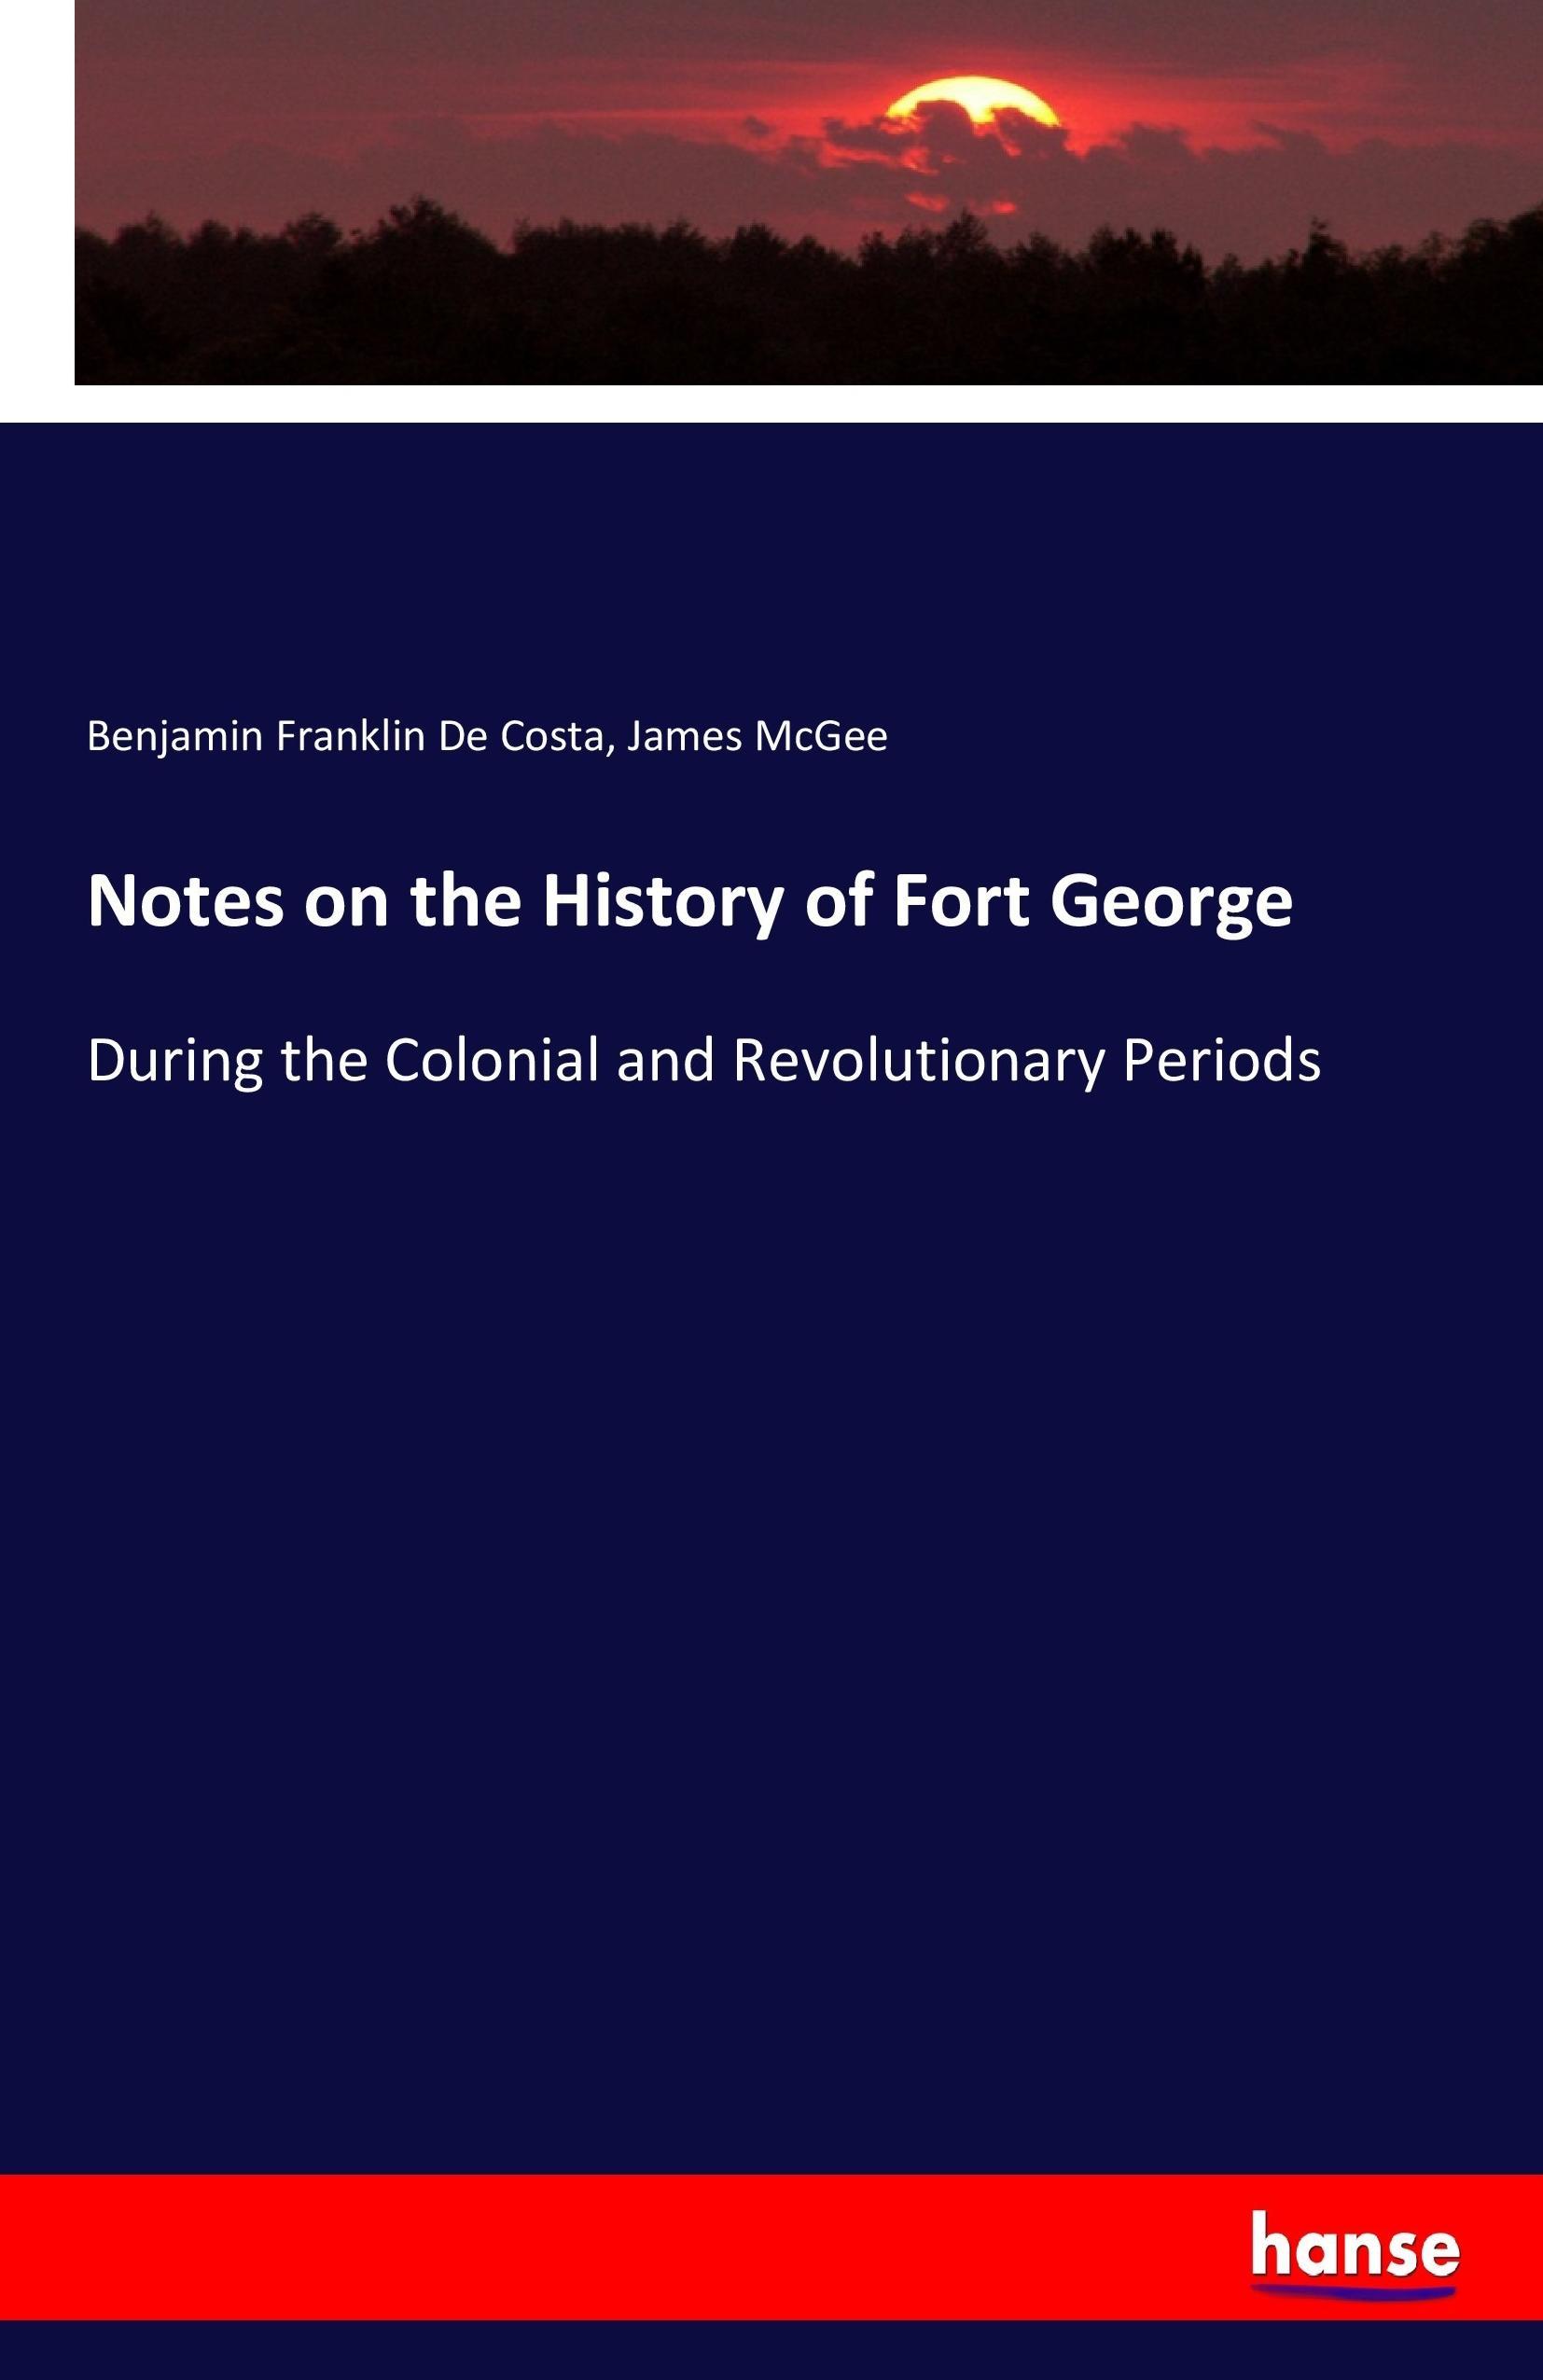 Notes on the History of Fort George - De Costa, Benjamin Franklin McGee, James